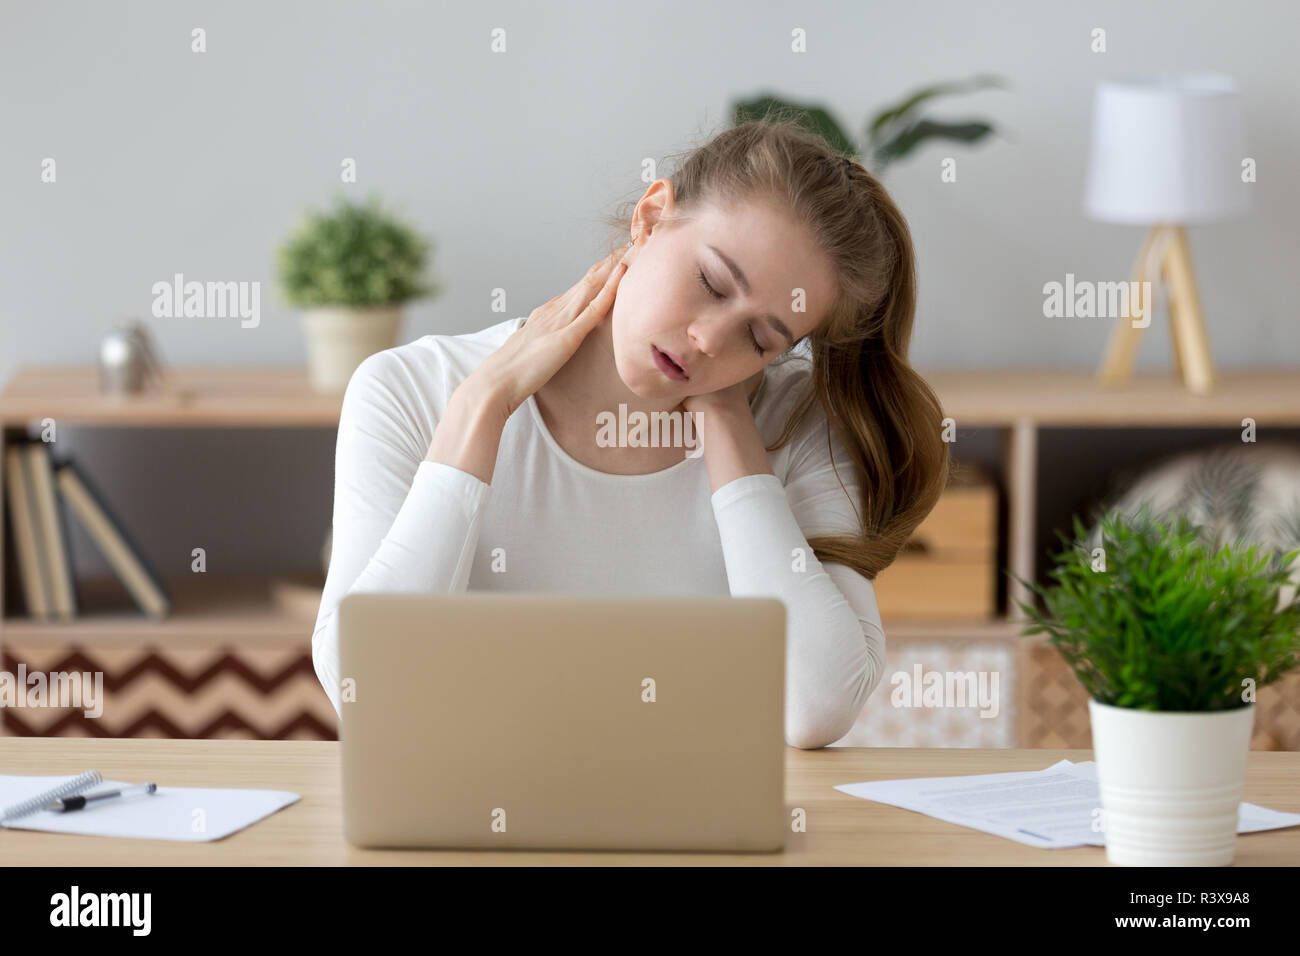 Tired girl massaging neck suffering from back pain Stock Photo